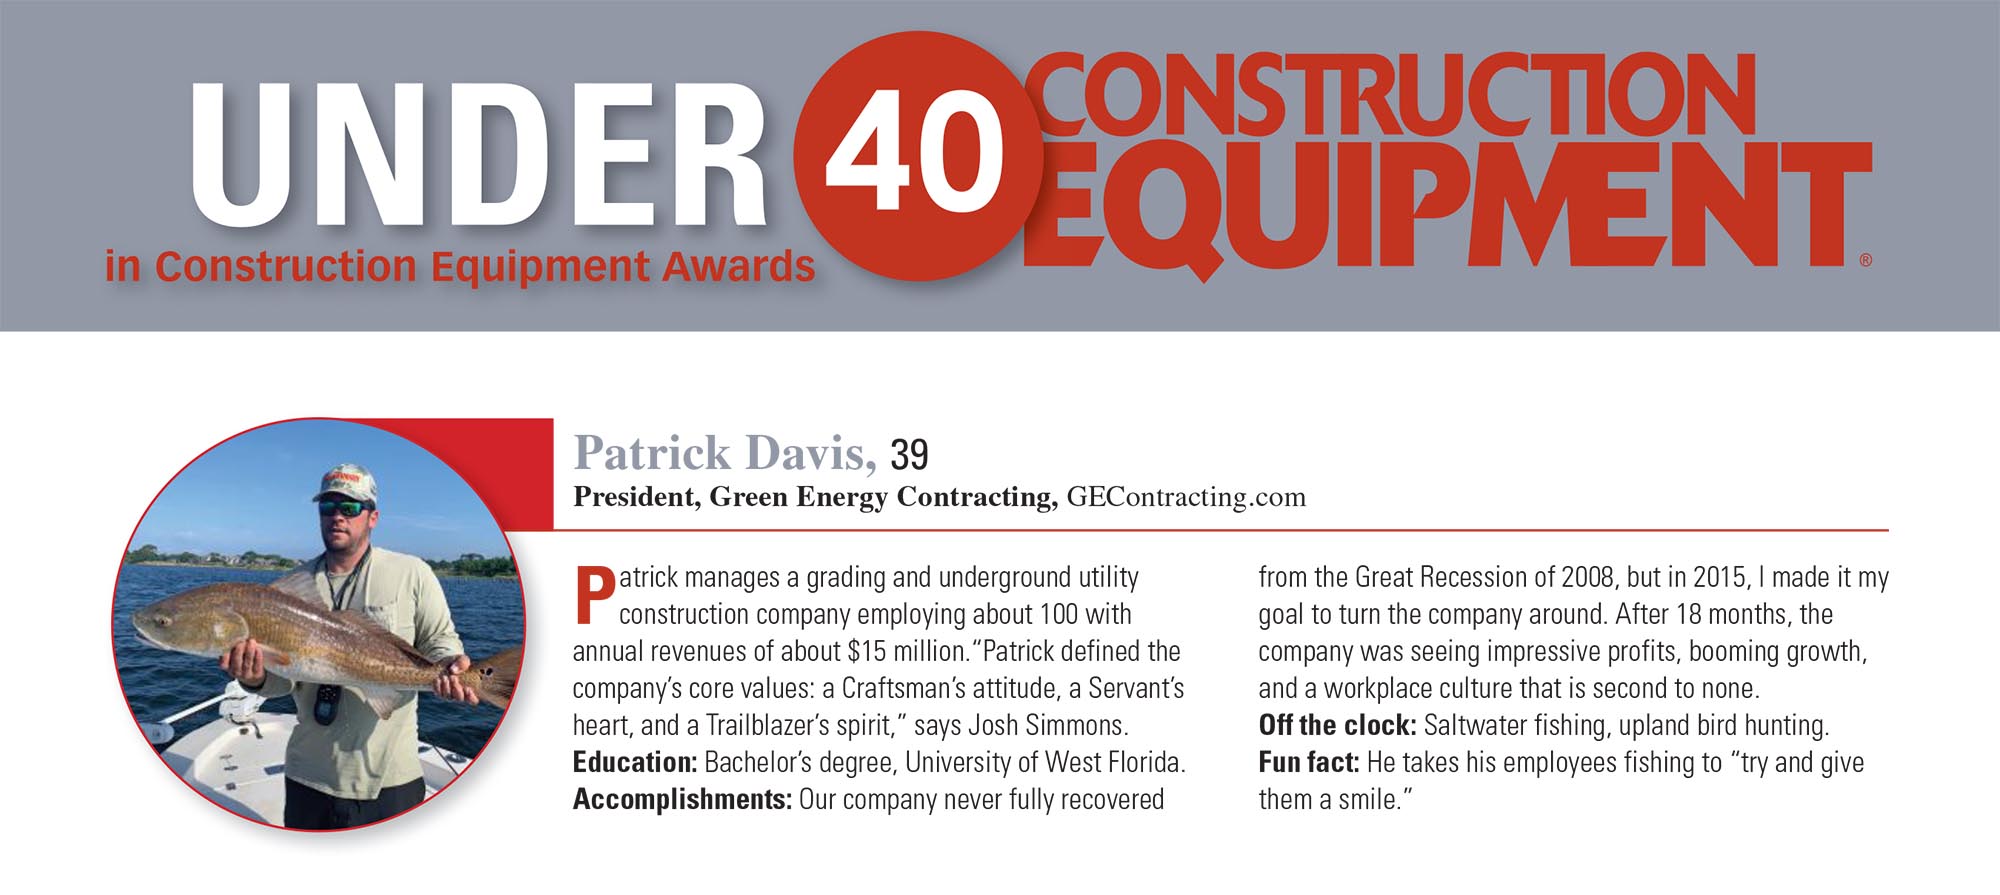 Snippet of Construction Equipment Magazine's Under 40 in Construction Equipment awards